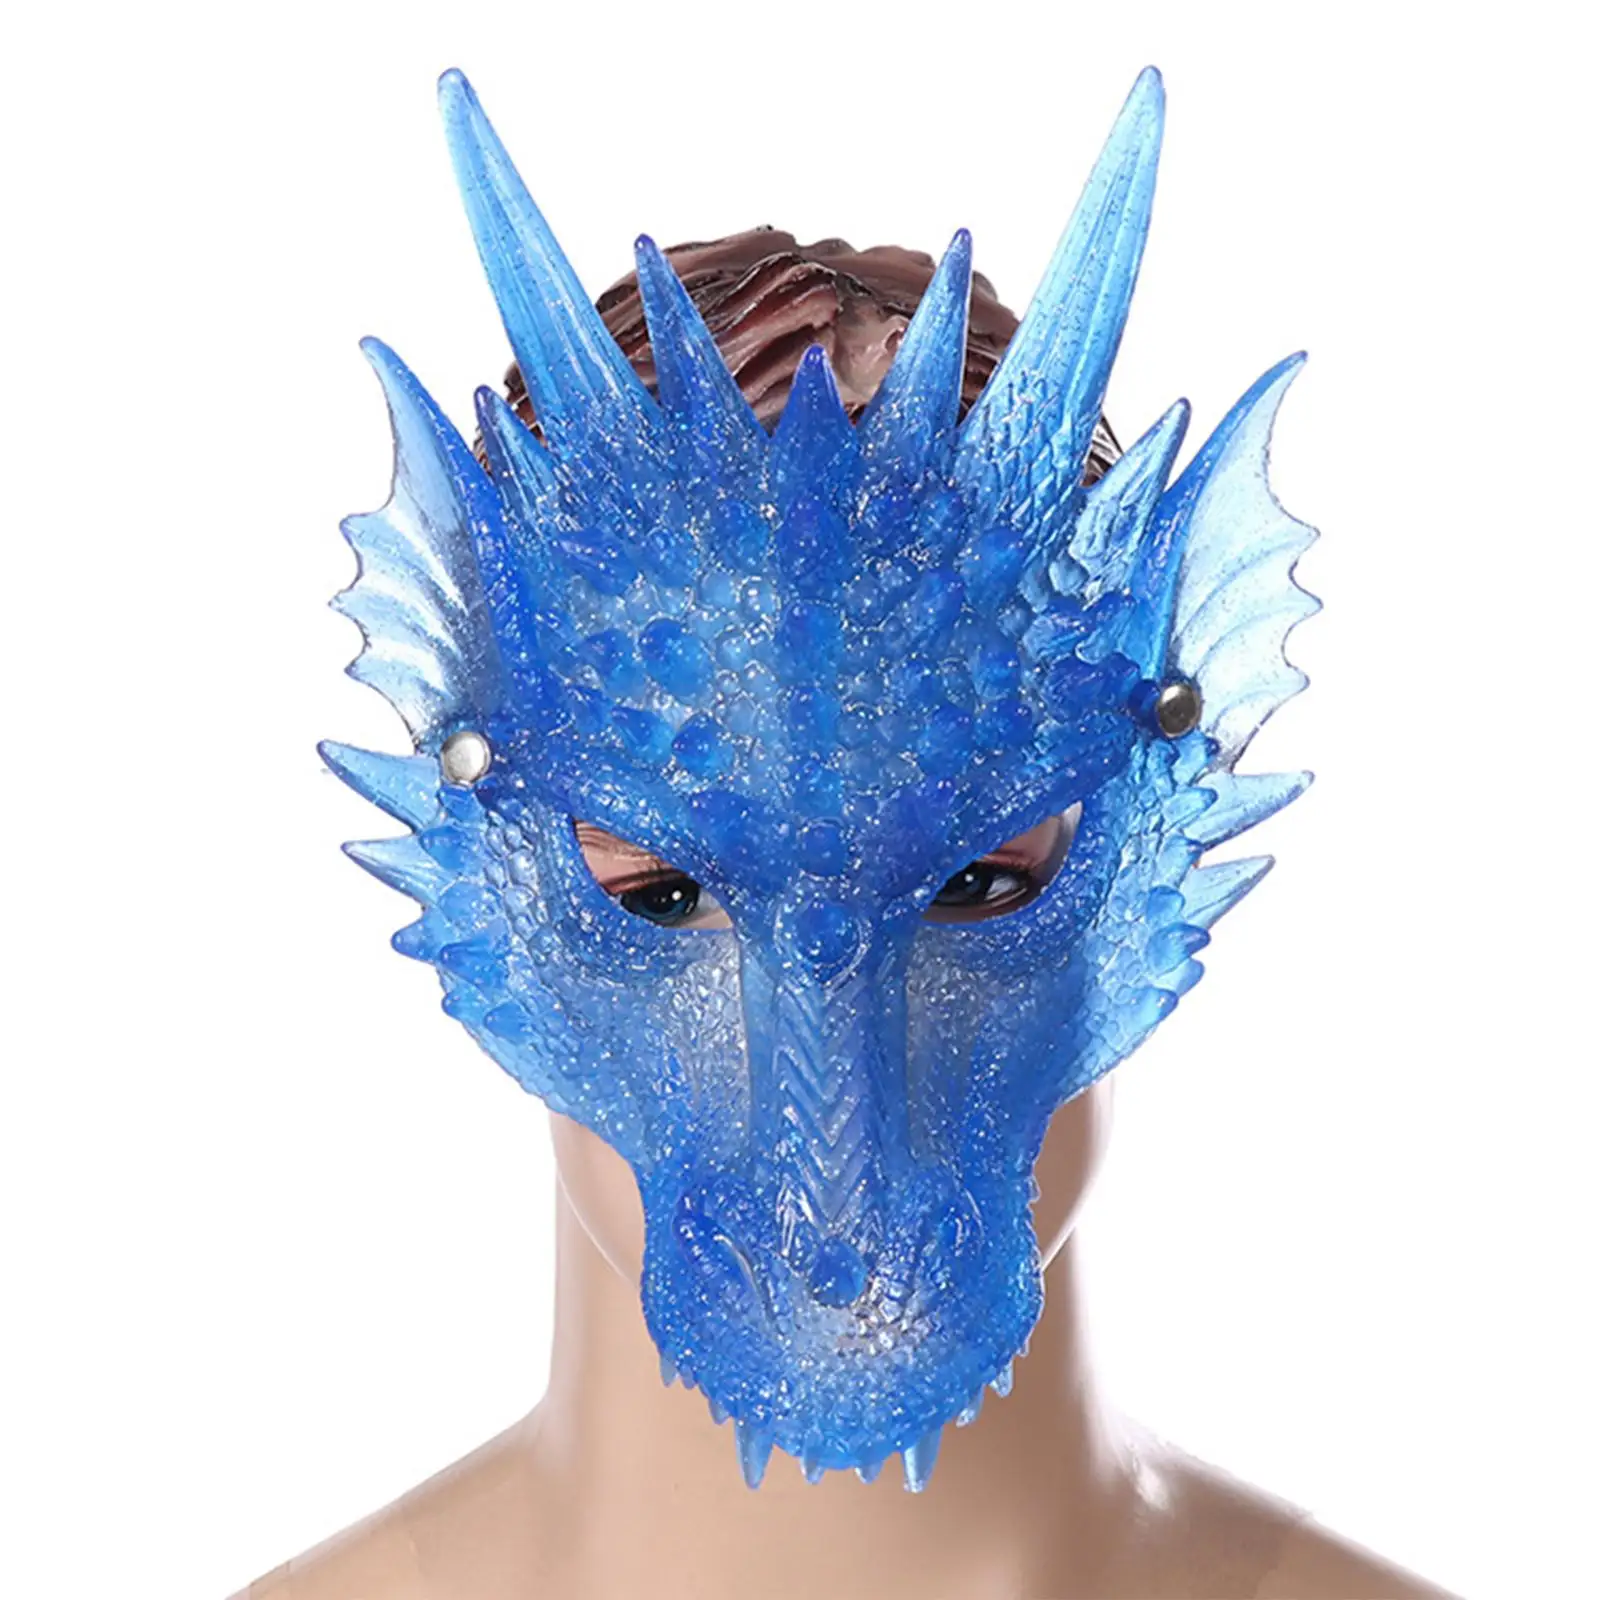 Movie Theme 3D Dragon Masks Unisex Half Face Cover Dinosaurio Masks for Masquerade Fancy Dress Cosplay Carnival Prom